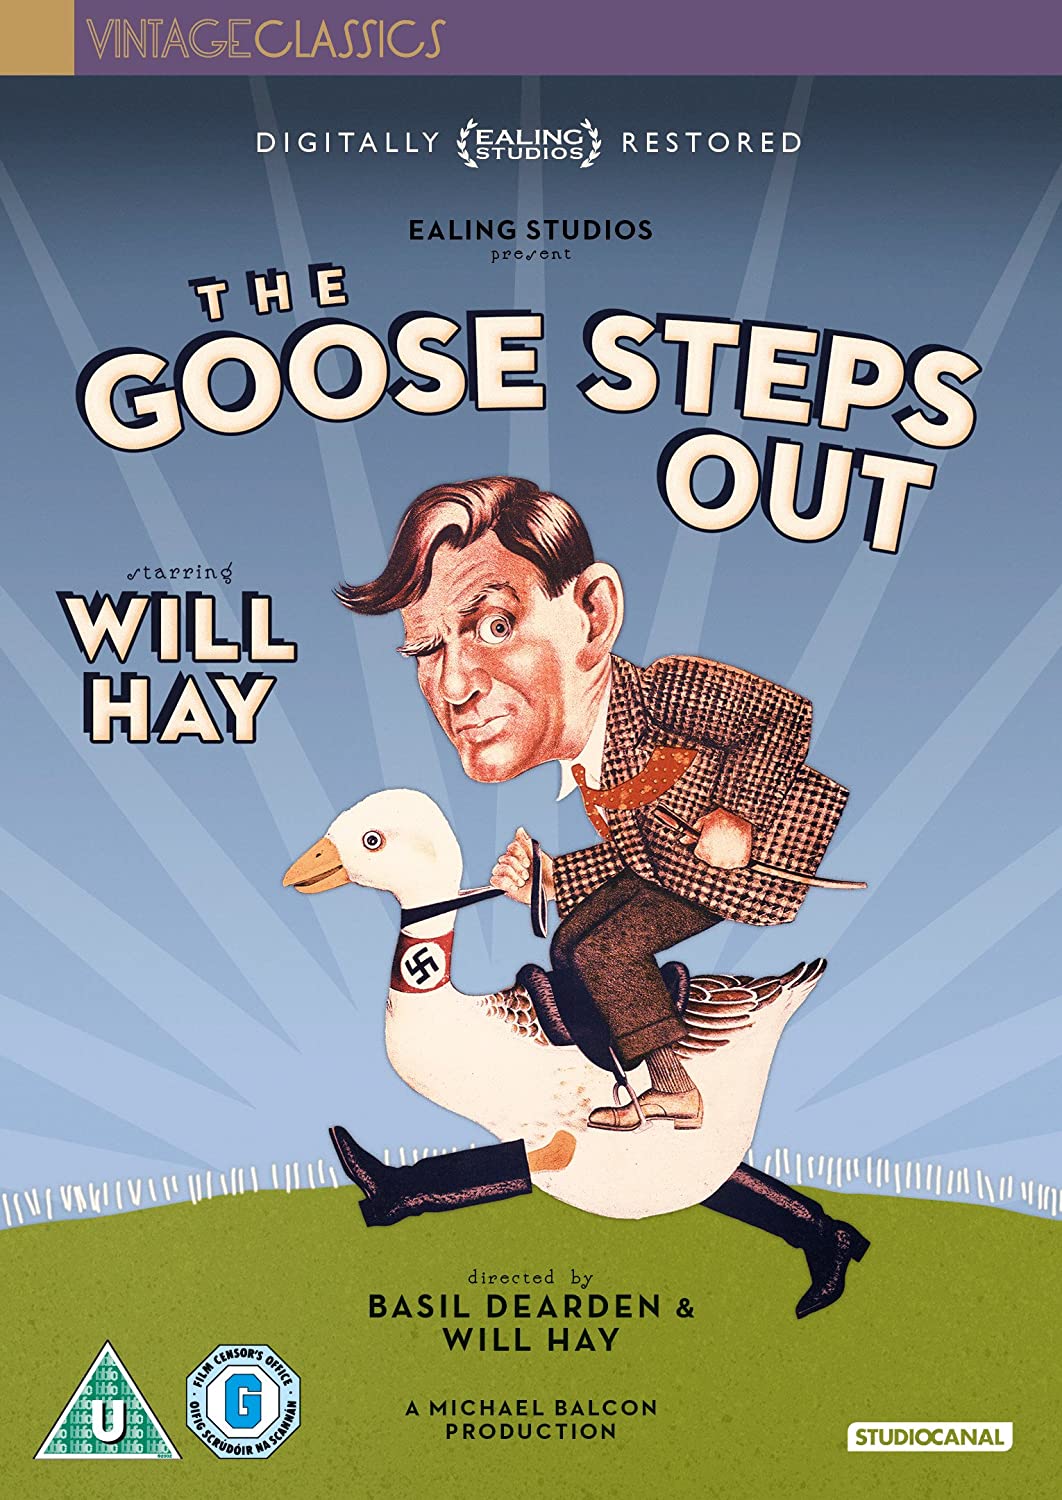 The Goose Steps Out - 75th Anniversary tally Restored) [1942] - Comedy/Black and white [DVD]